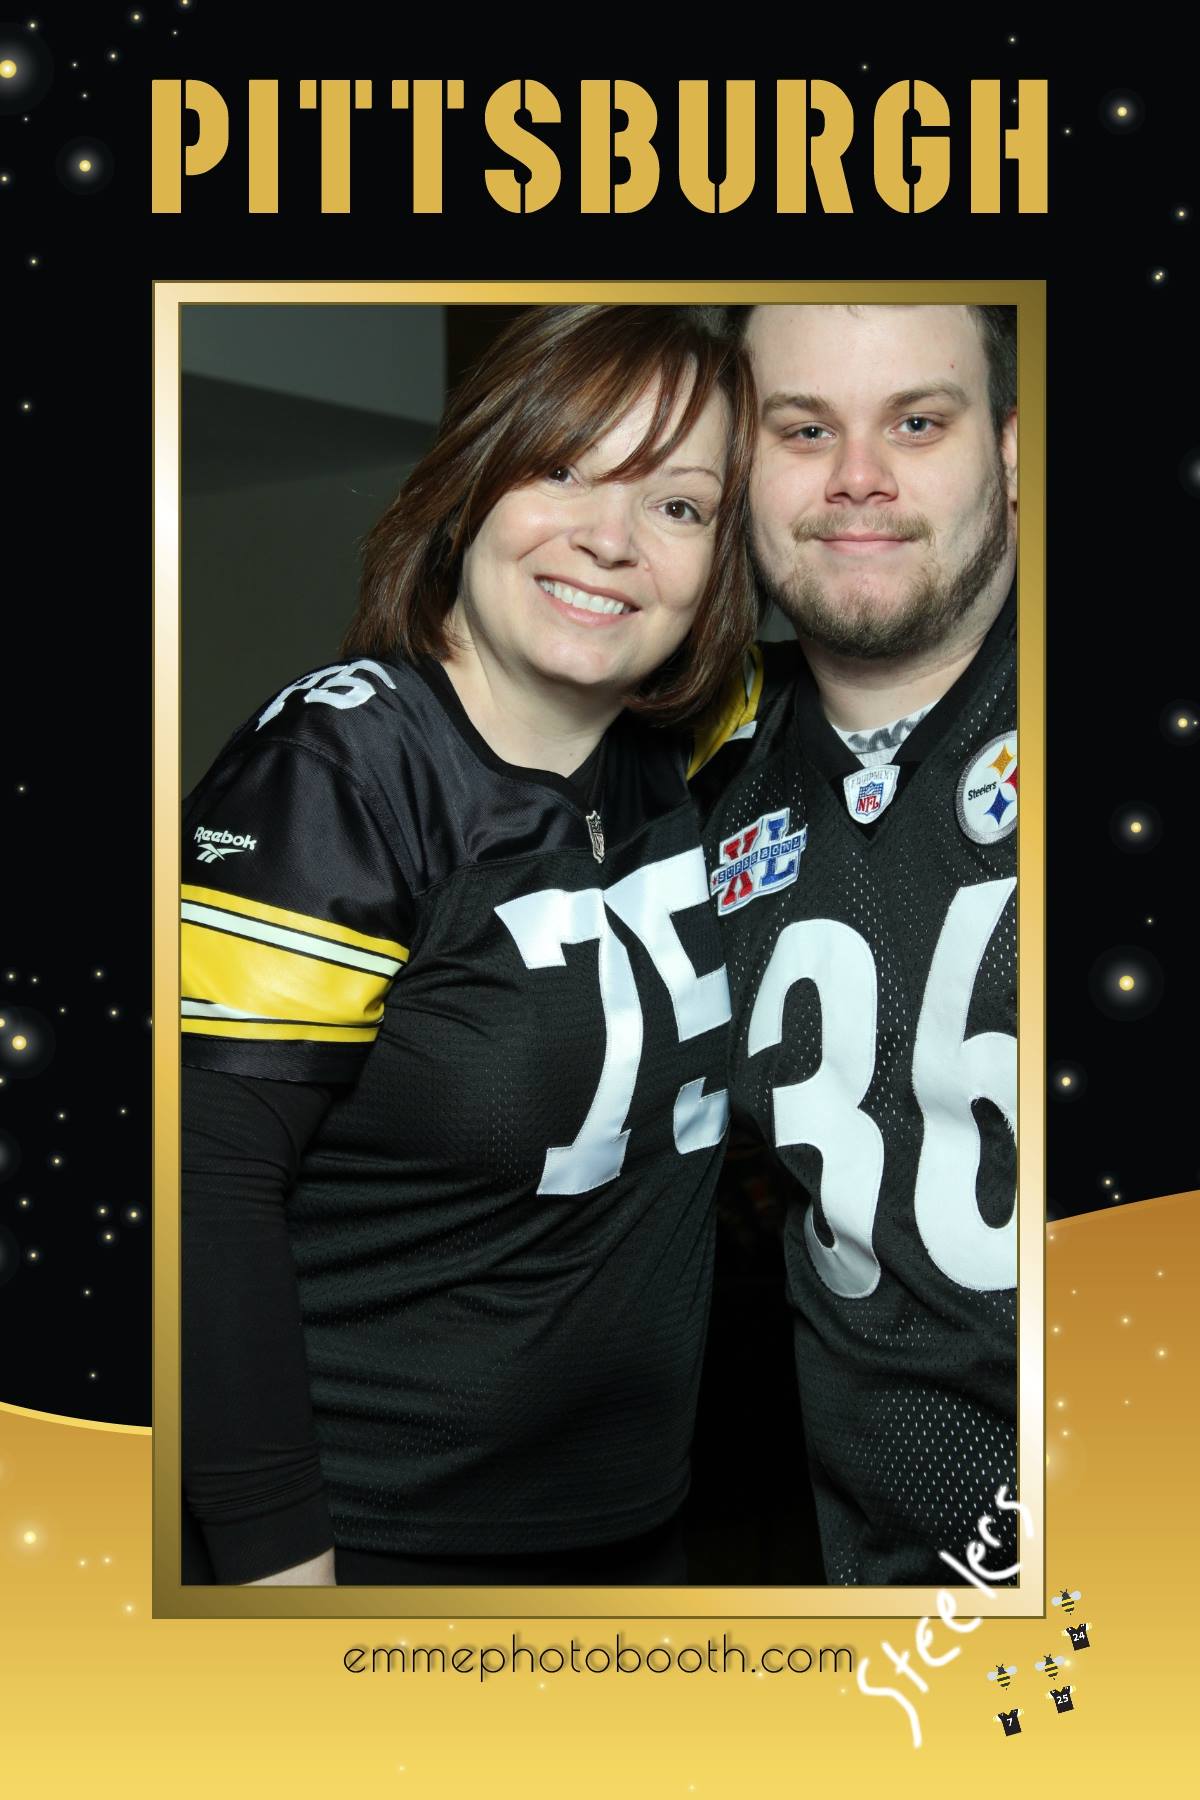 Pittsburgh Tailgate Photo Booth